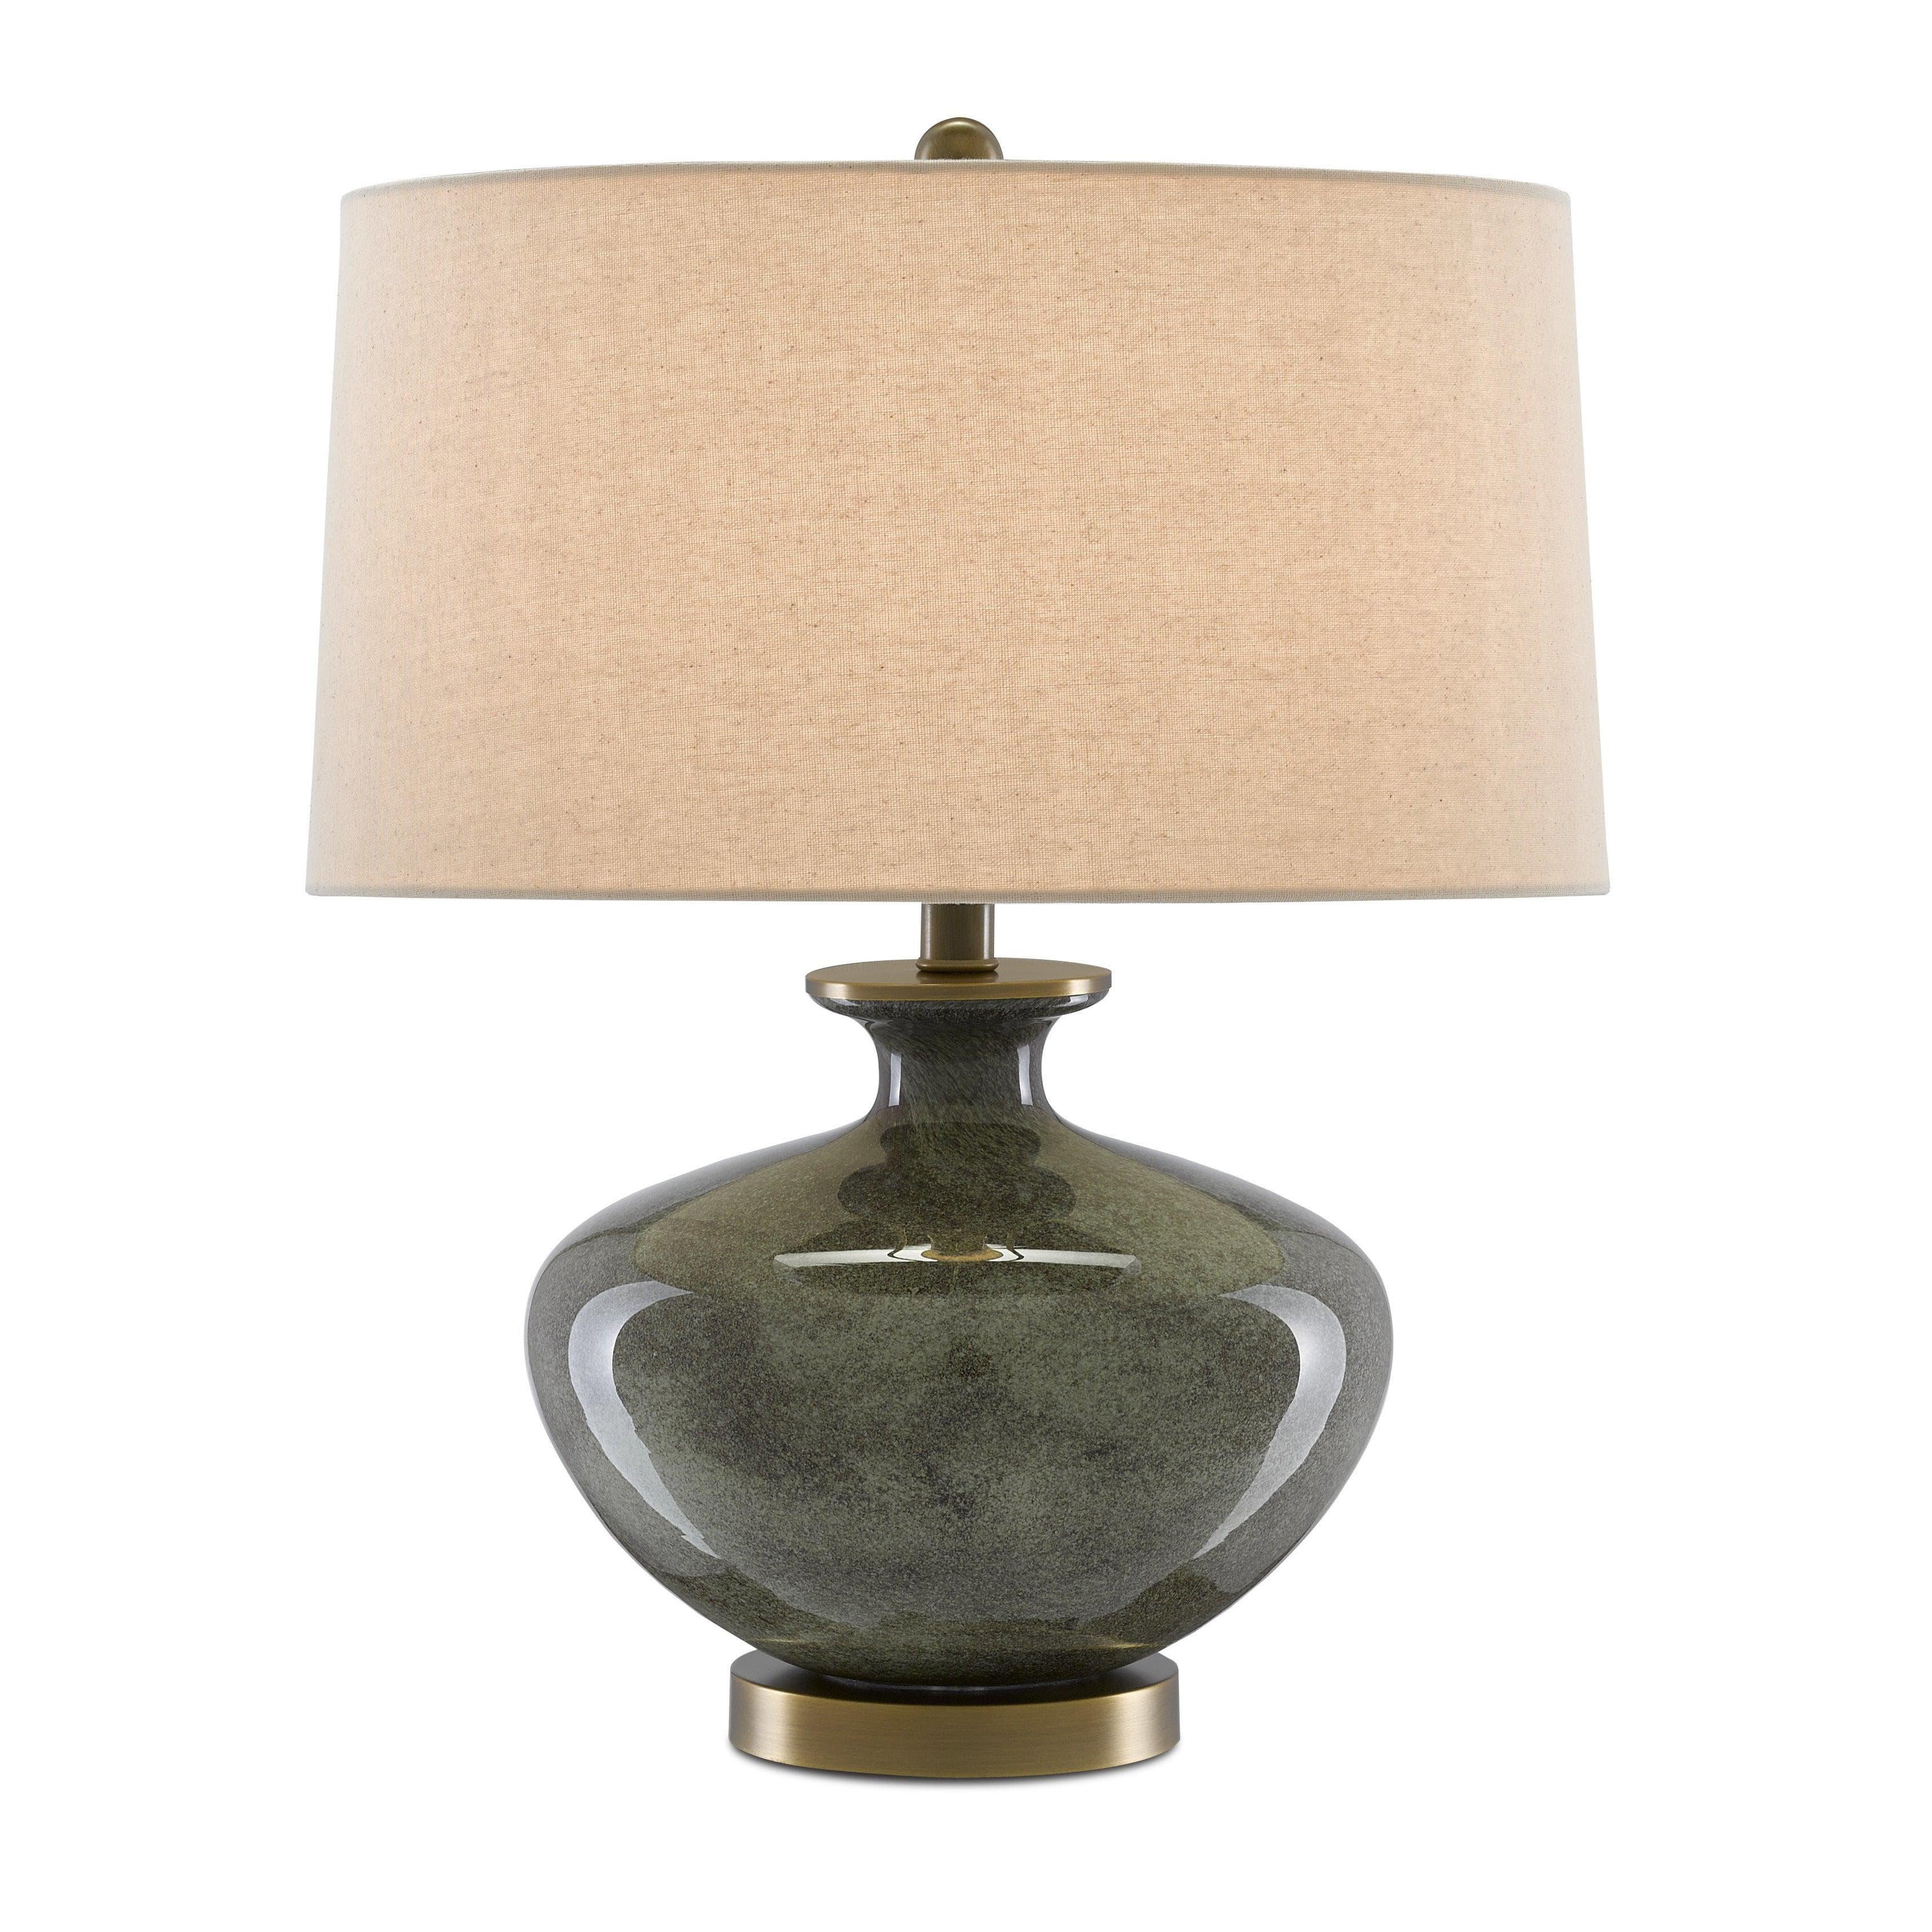 Currey and Company - Greenlea Table Lamp - 6000-0601 | Montreal Lighting & Hardware